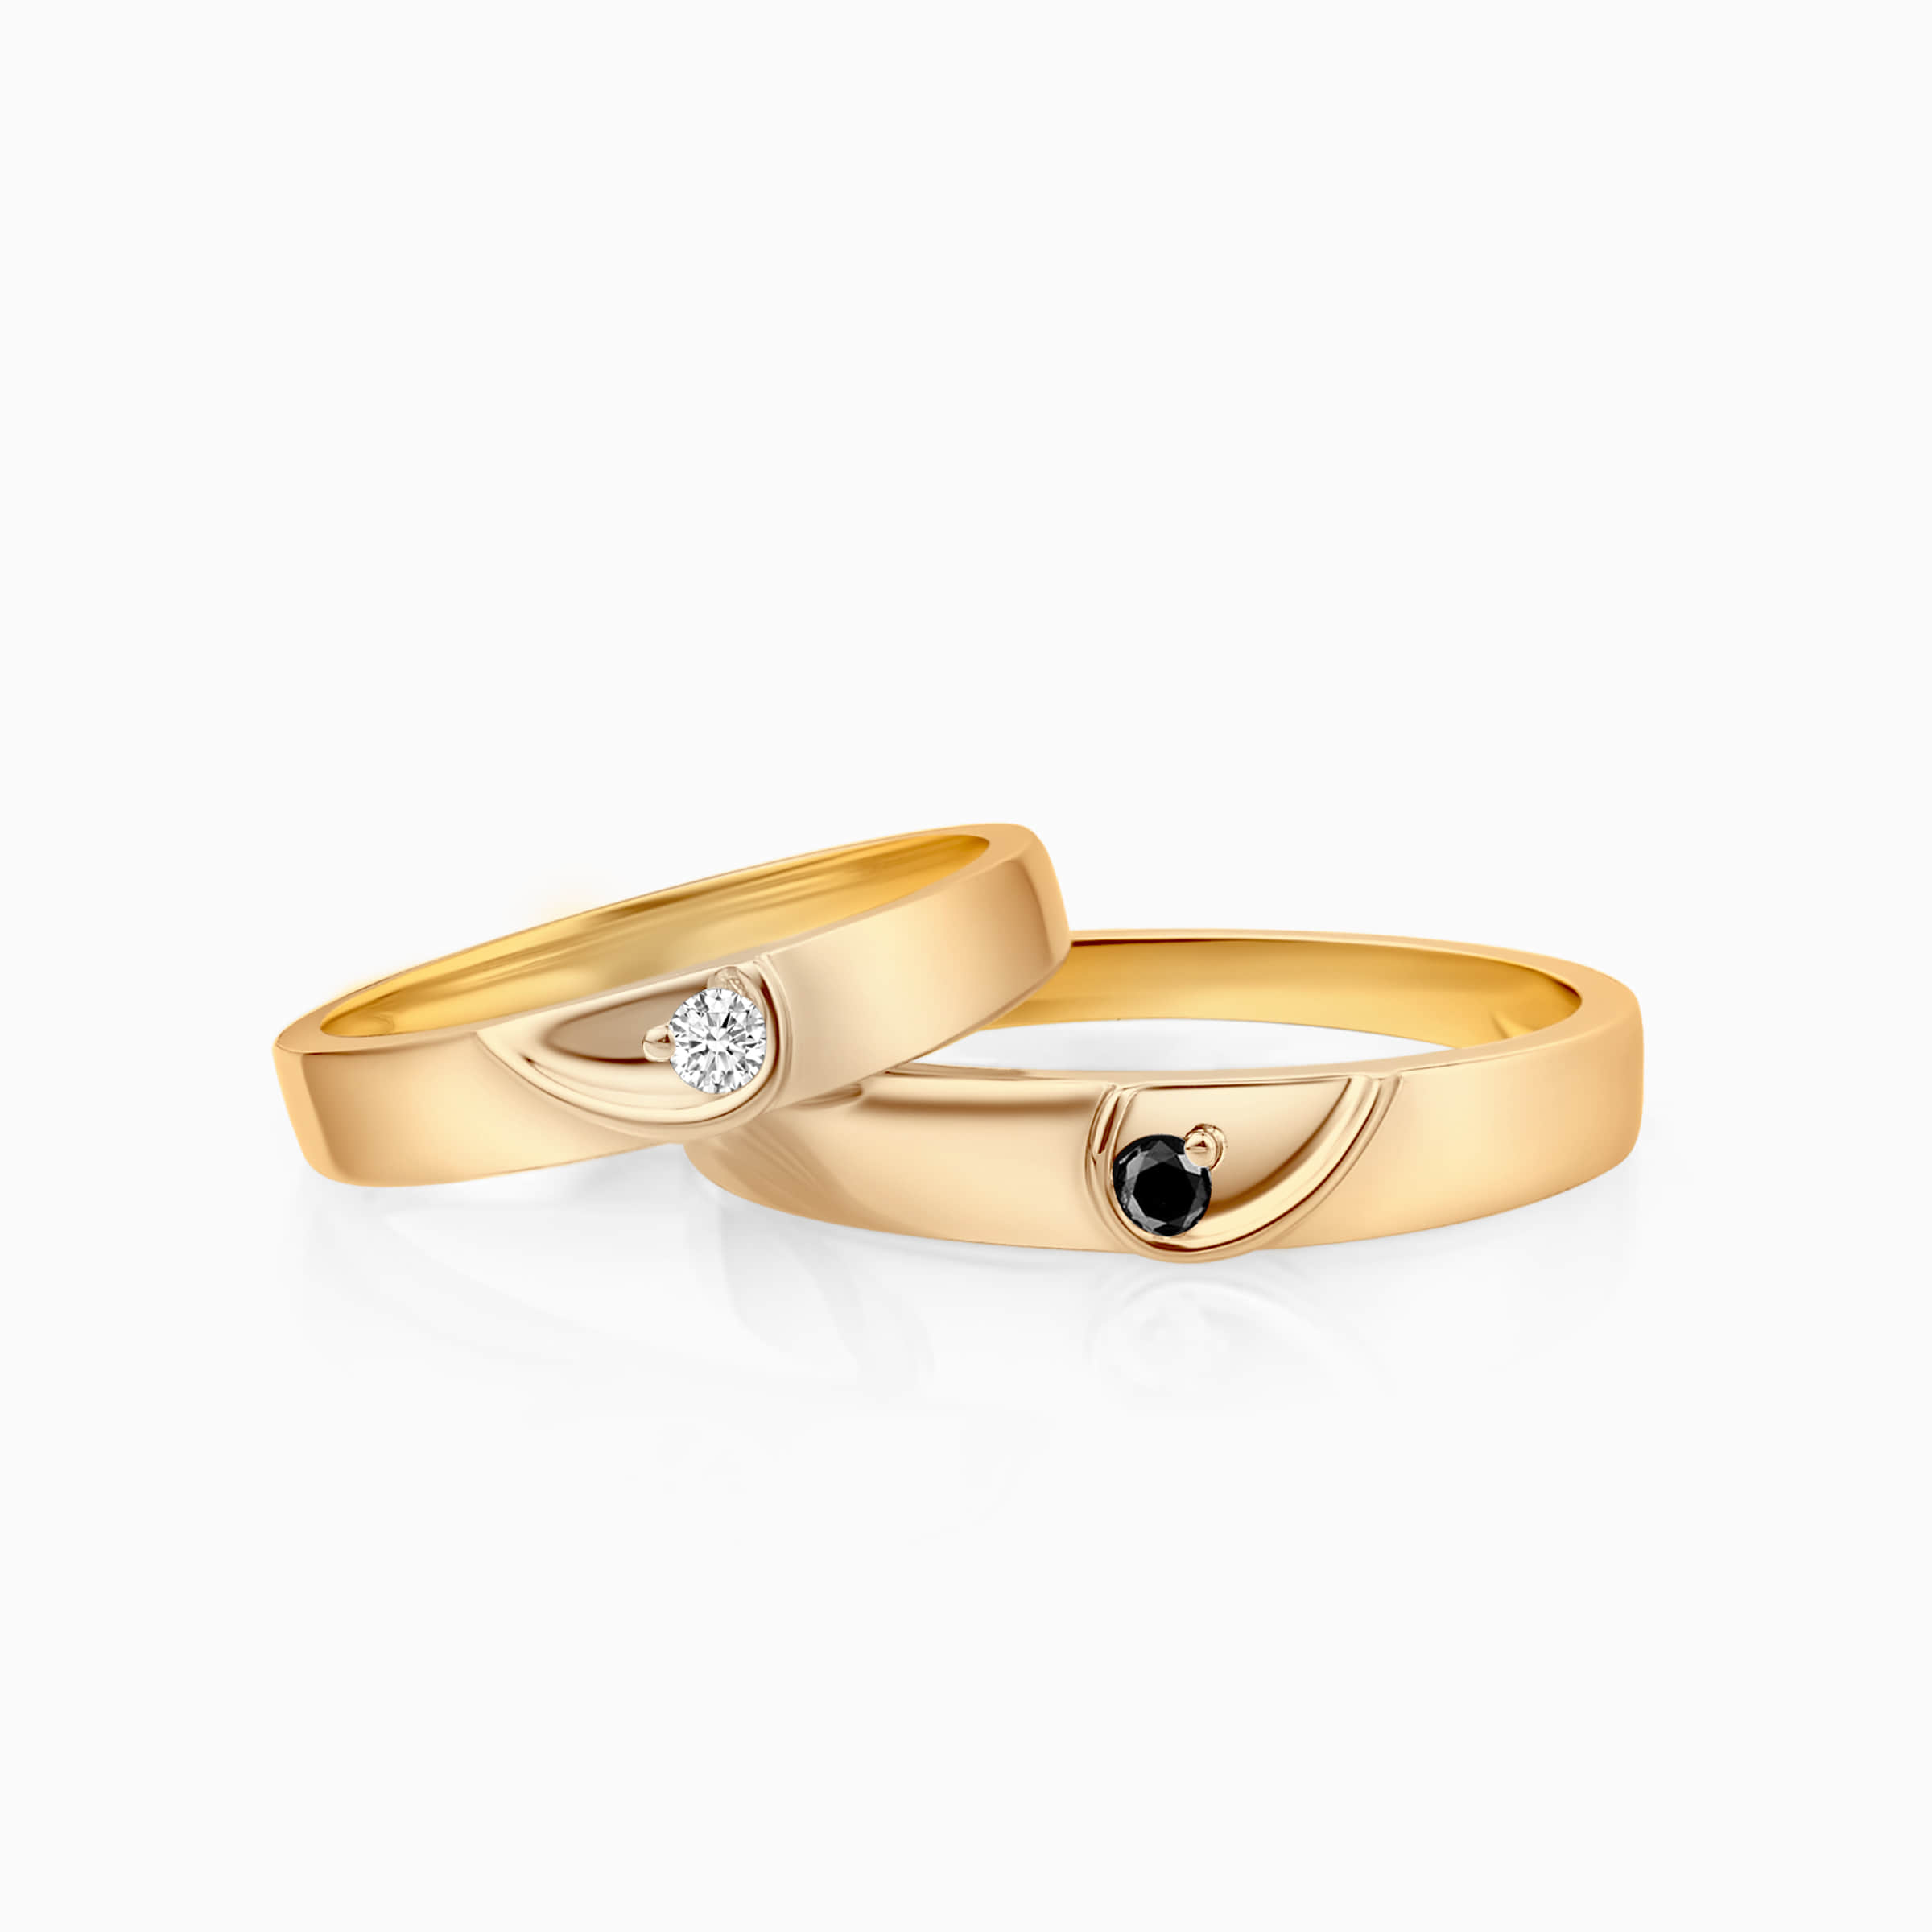 Darry Ring heart wedding rings for couple in yellow gold